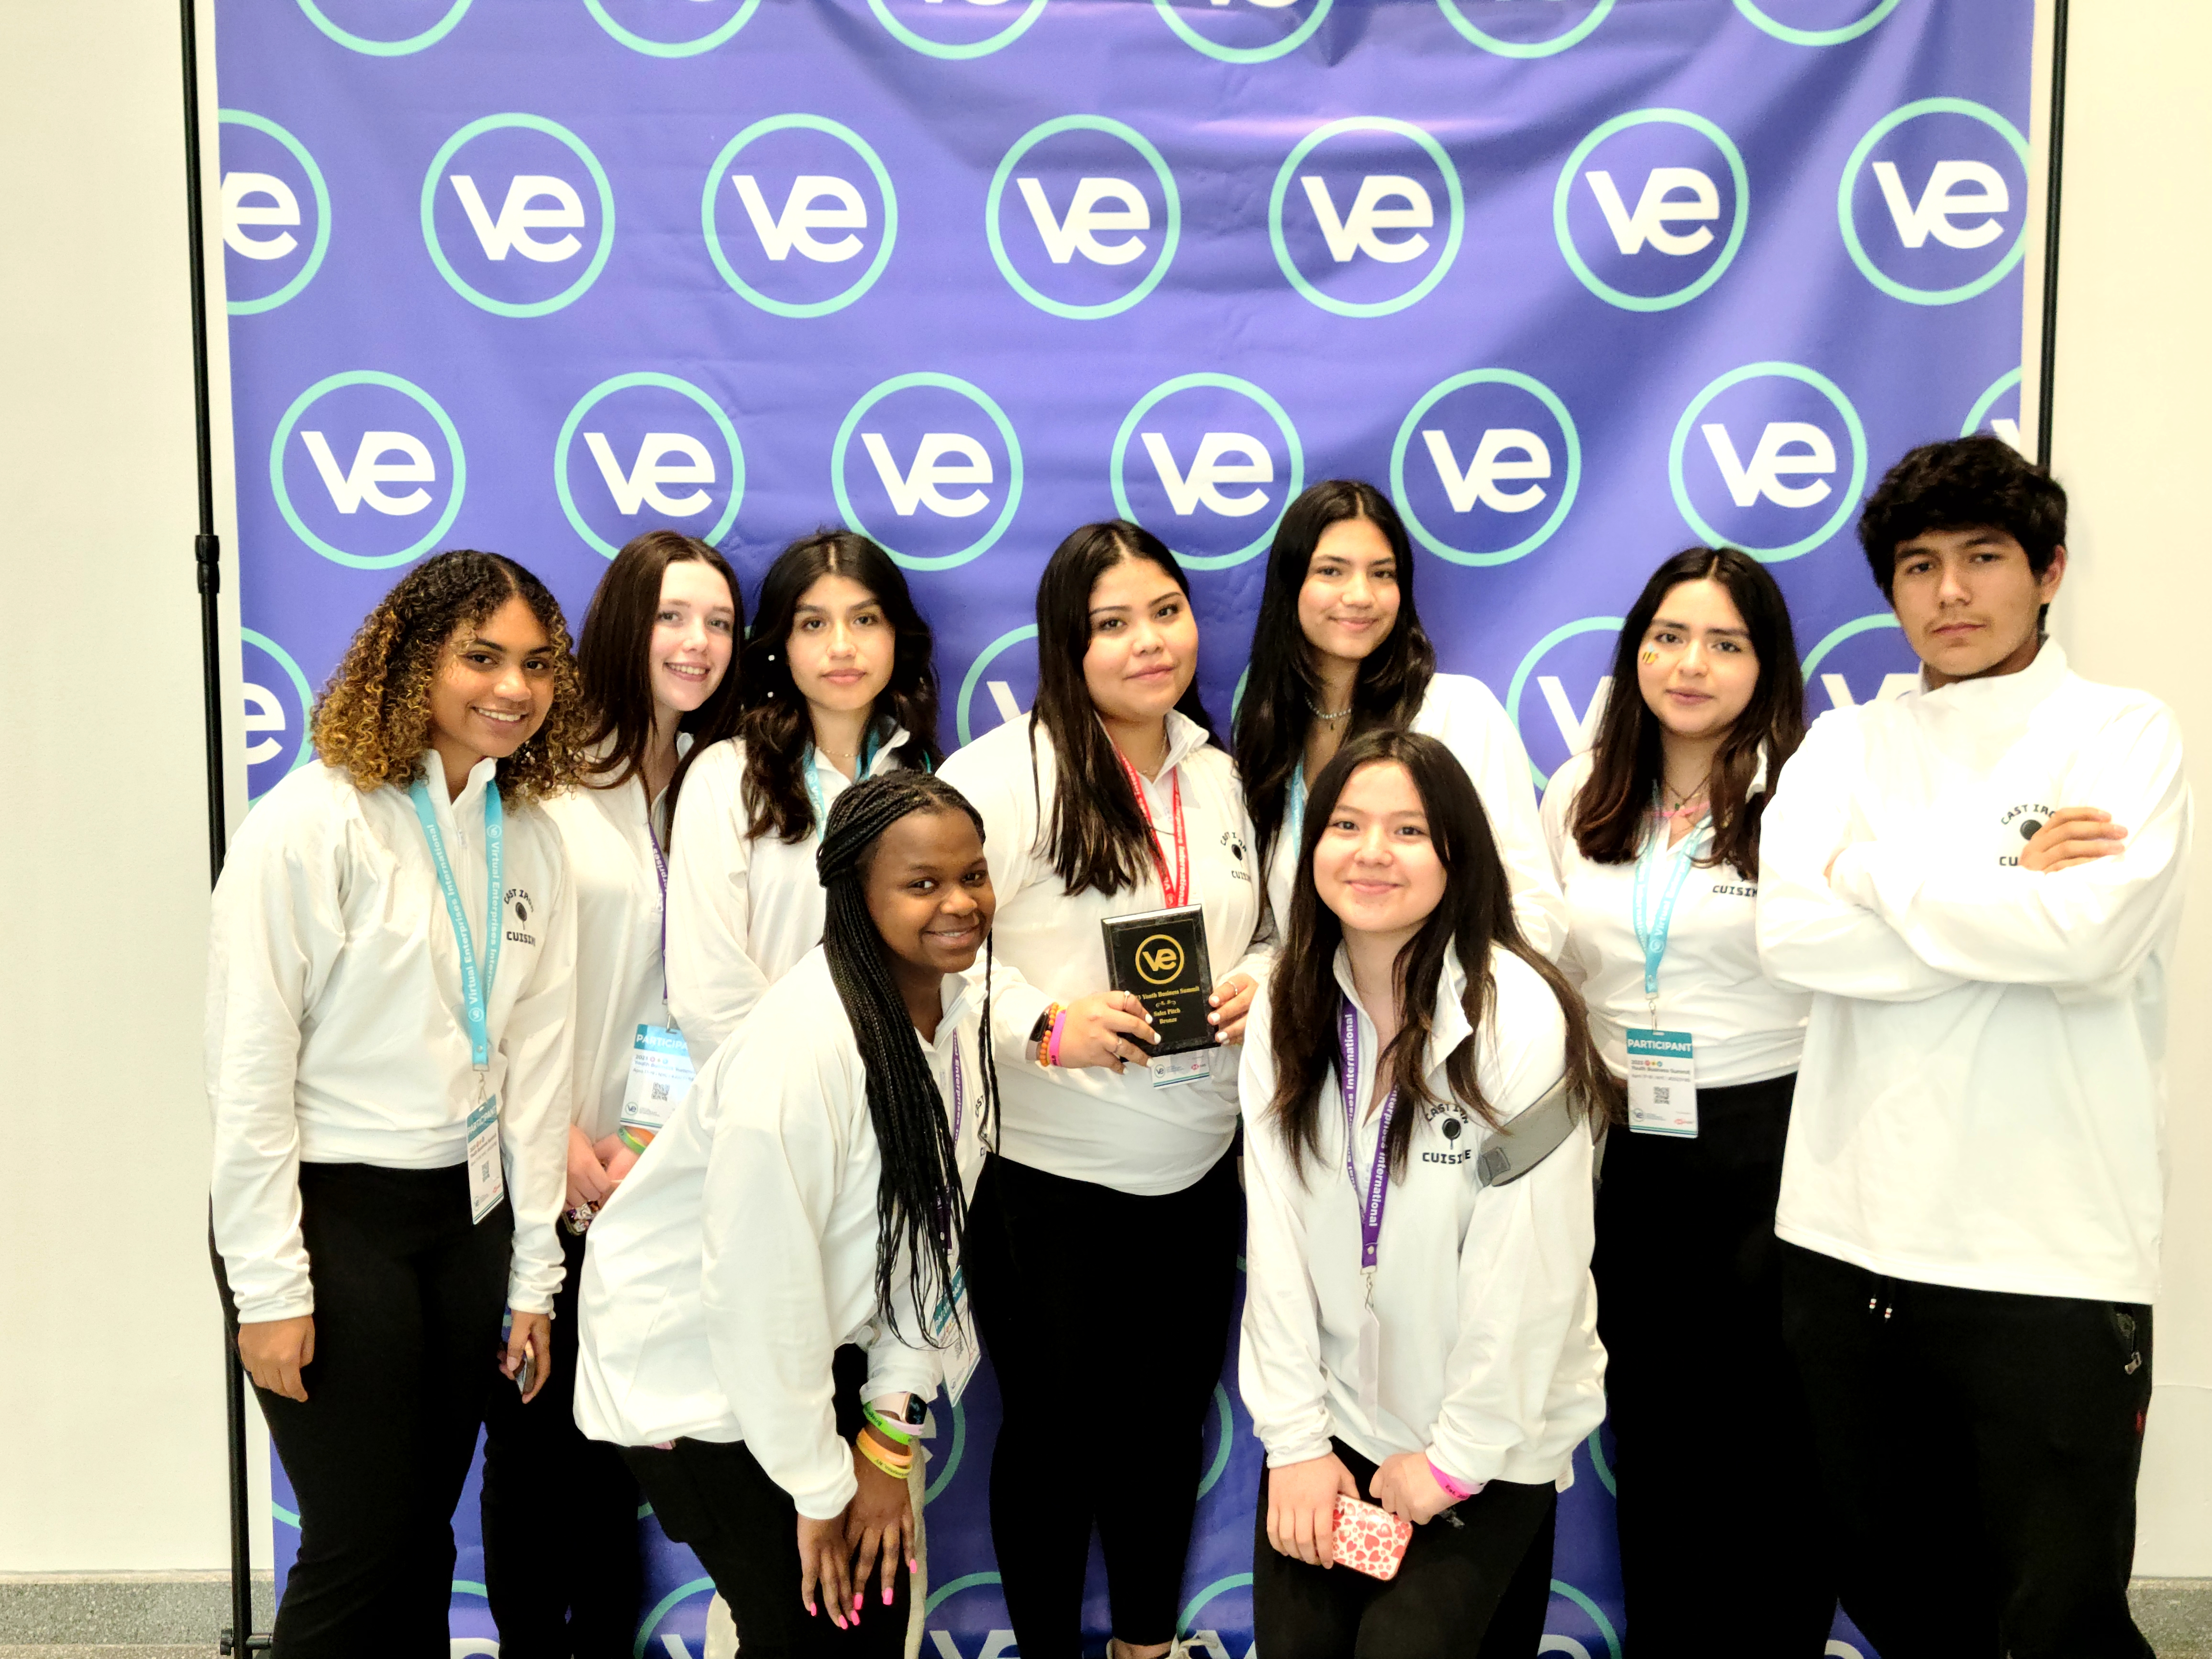 Bridgehampton High School students, from left, Aiyanna Spears, Avery McCleland, Mariana Gutierrez, Sheily Ruiz Soto, Maria Gonzalez, Kim Villa, George Caguana, Cheyanne Lamb and Sarah Kapon, attended the Virtual Enterprise 2023 Youth Business Summit/International Trade Show on April 19 at the Javits Convention Center in Manhattan along with teacher Kameron Kaiser. The students won a bronze award for the sales pitch competition. COURTESY BRIDGEHAMPTON SCHOOL DISTRICT